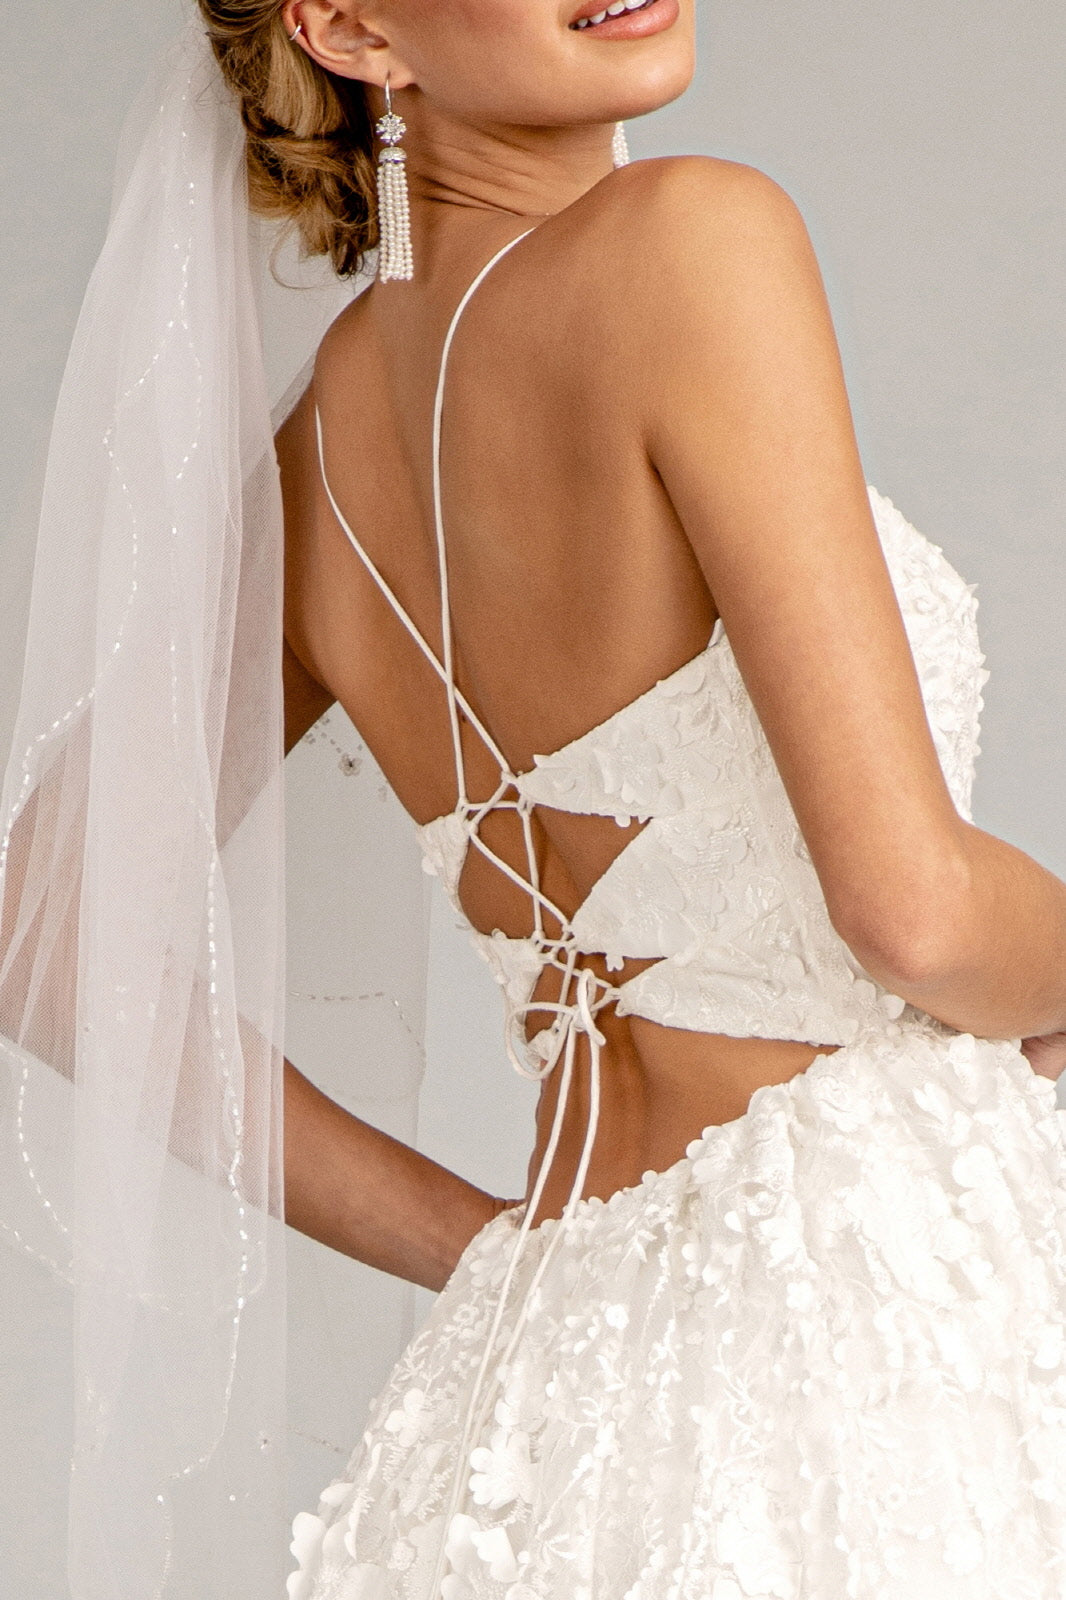 Floral Embroidered Lace-Up Mesh Wedding Gown Sweetheart Neckline GLGL1985-WEDDING GOWNS-smcfashion.com